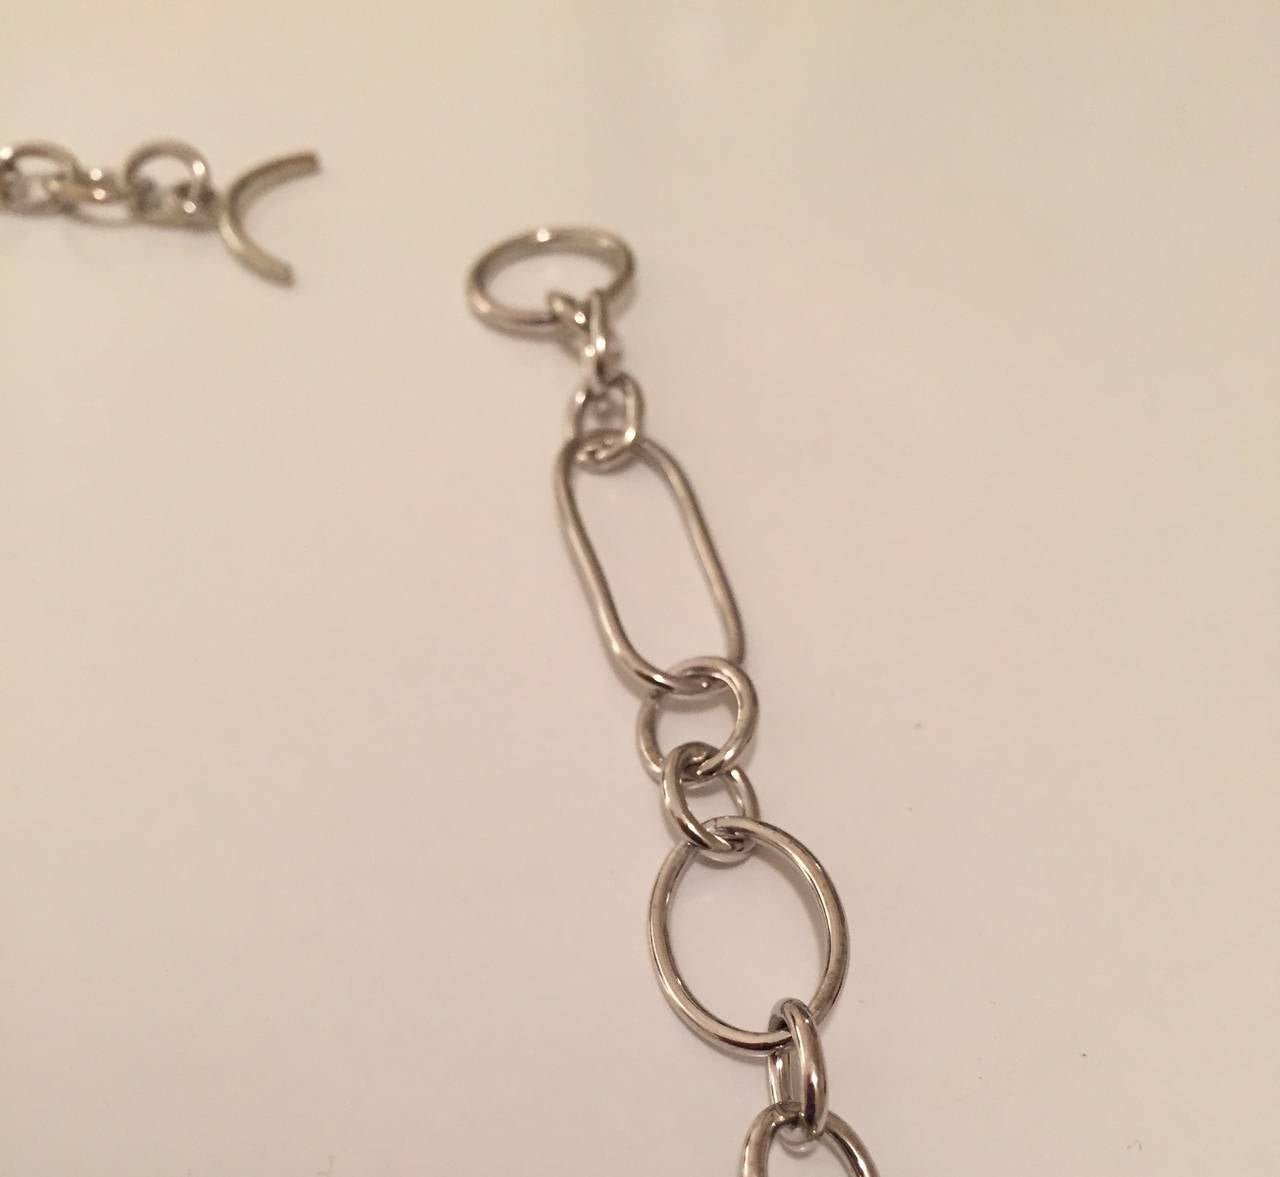 18kt White Gold Mixed shape hollow link necklace with Toggle closure finished at 24